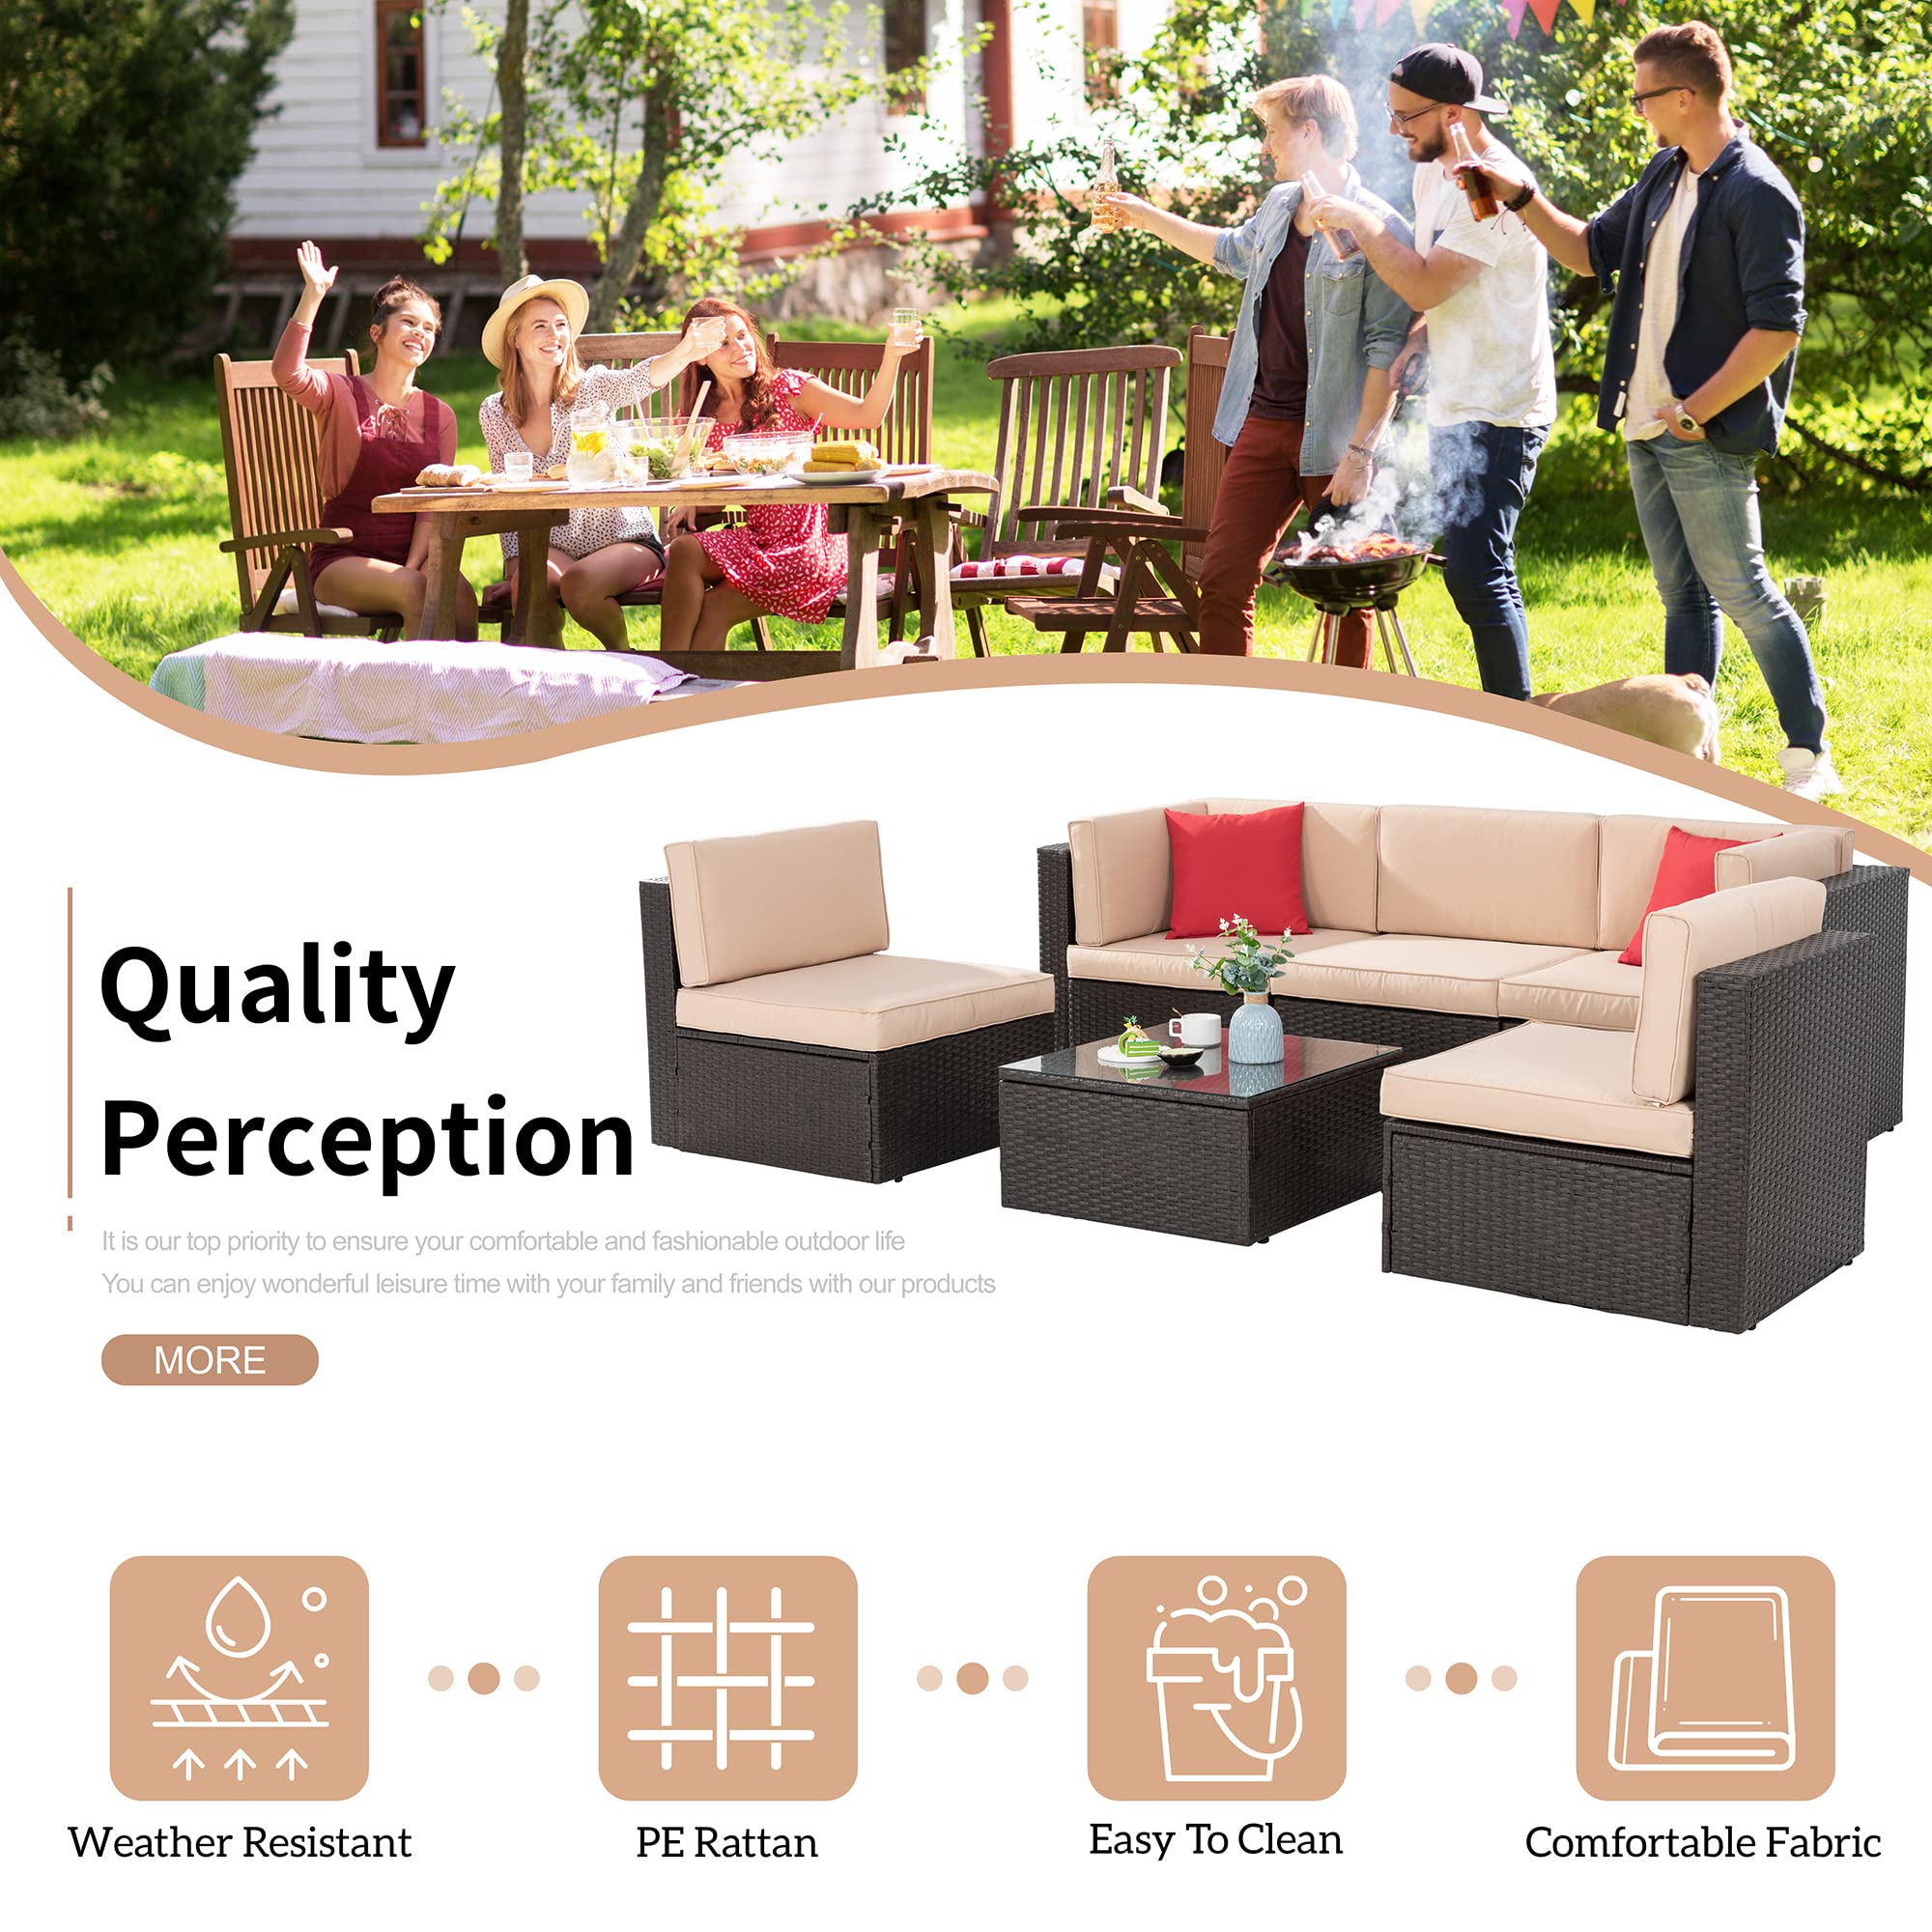 Shintenchi 6 Pieces Patio Furniture Sets Outdoor All-Weather Sectional Patio Sofa Set PE Rattan Manual Weaving Wicker Patio Conversation Set with Glass Table&Ottoman Cushion and Red Pillows, neutral